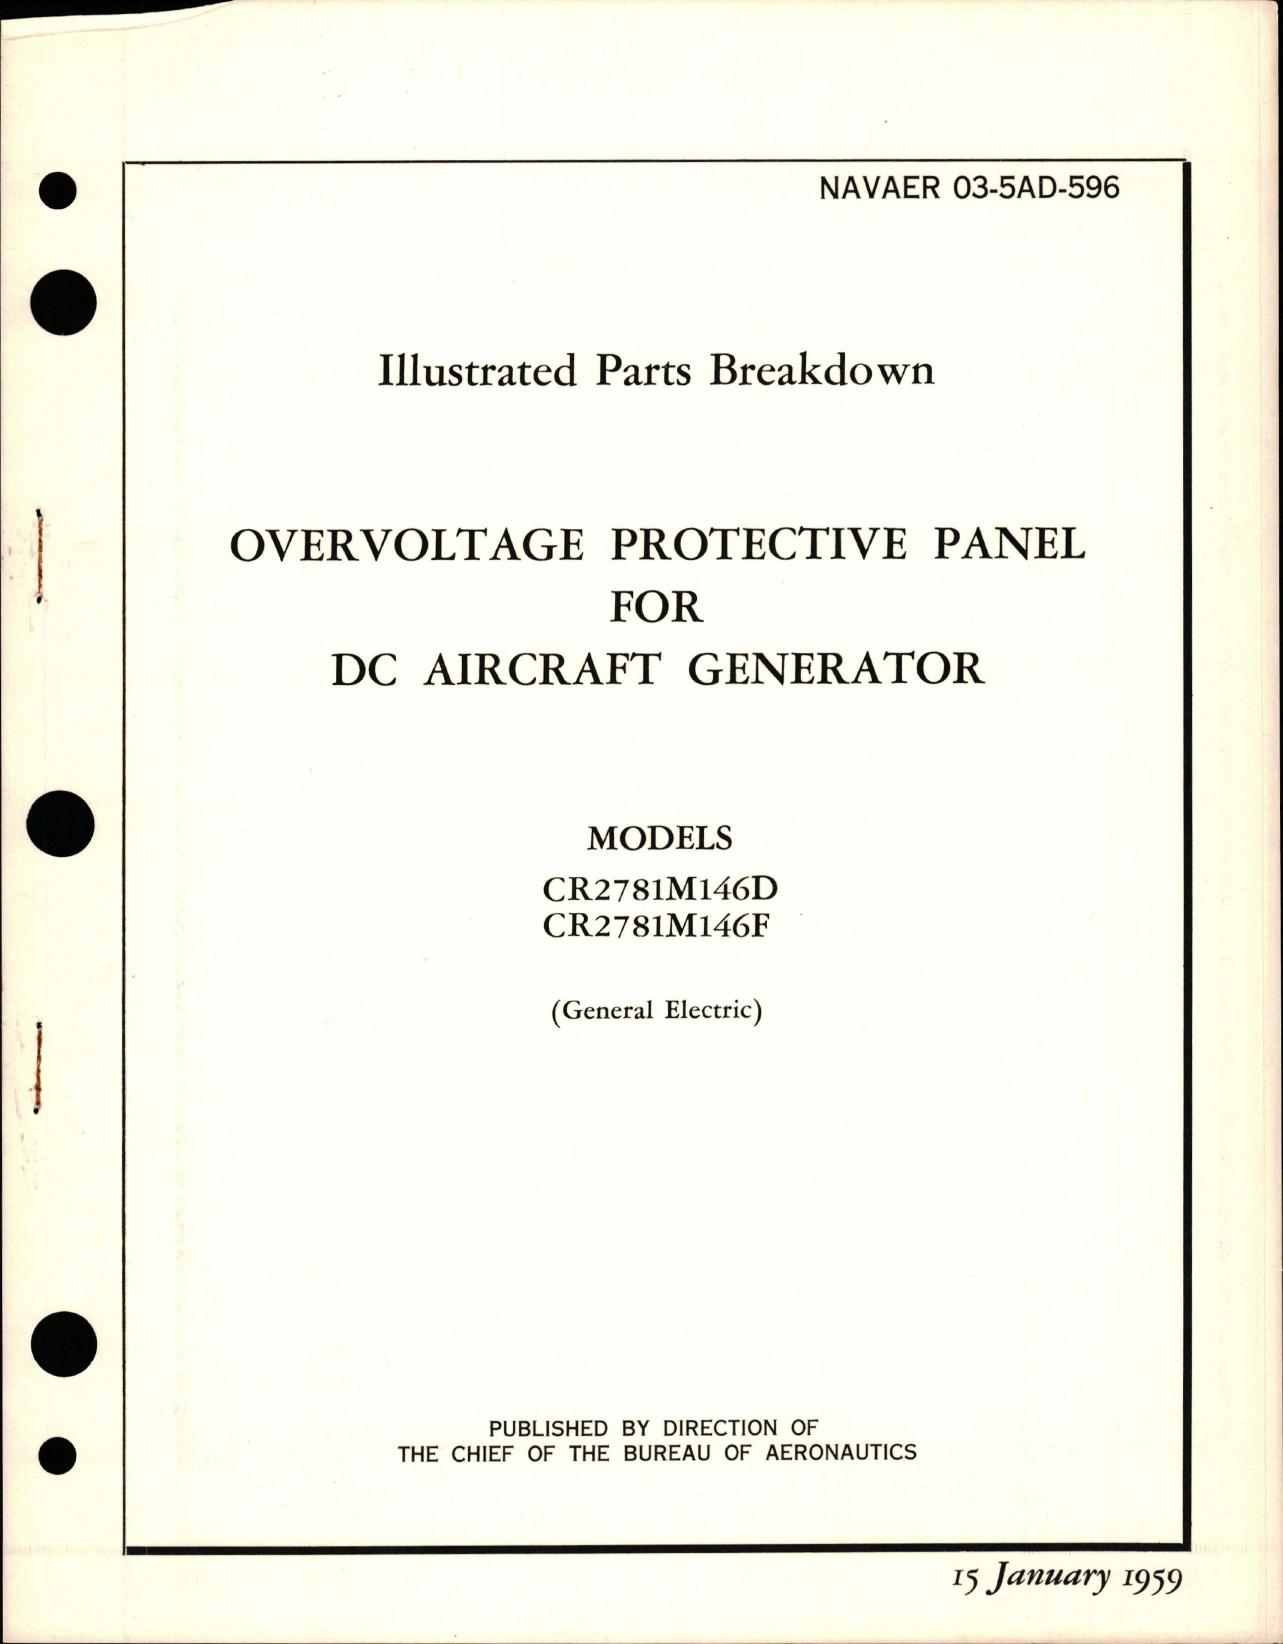 Sample page 1 from AirCorps Library document: Illustrated Parts Breakdown for Overvoltage Protective Panel for DC Generator - Models CR2781M146D and CR2781M146F